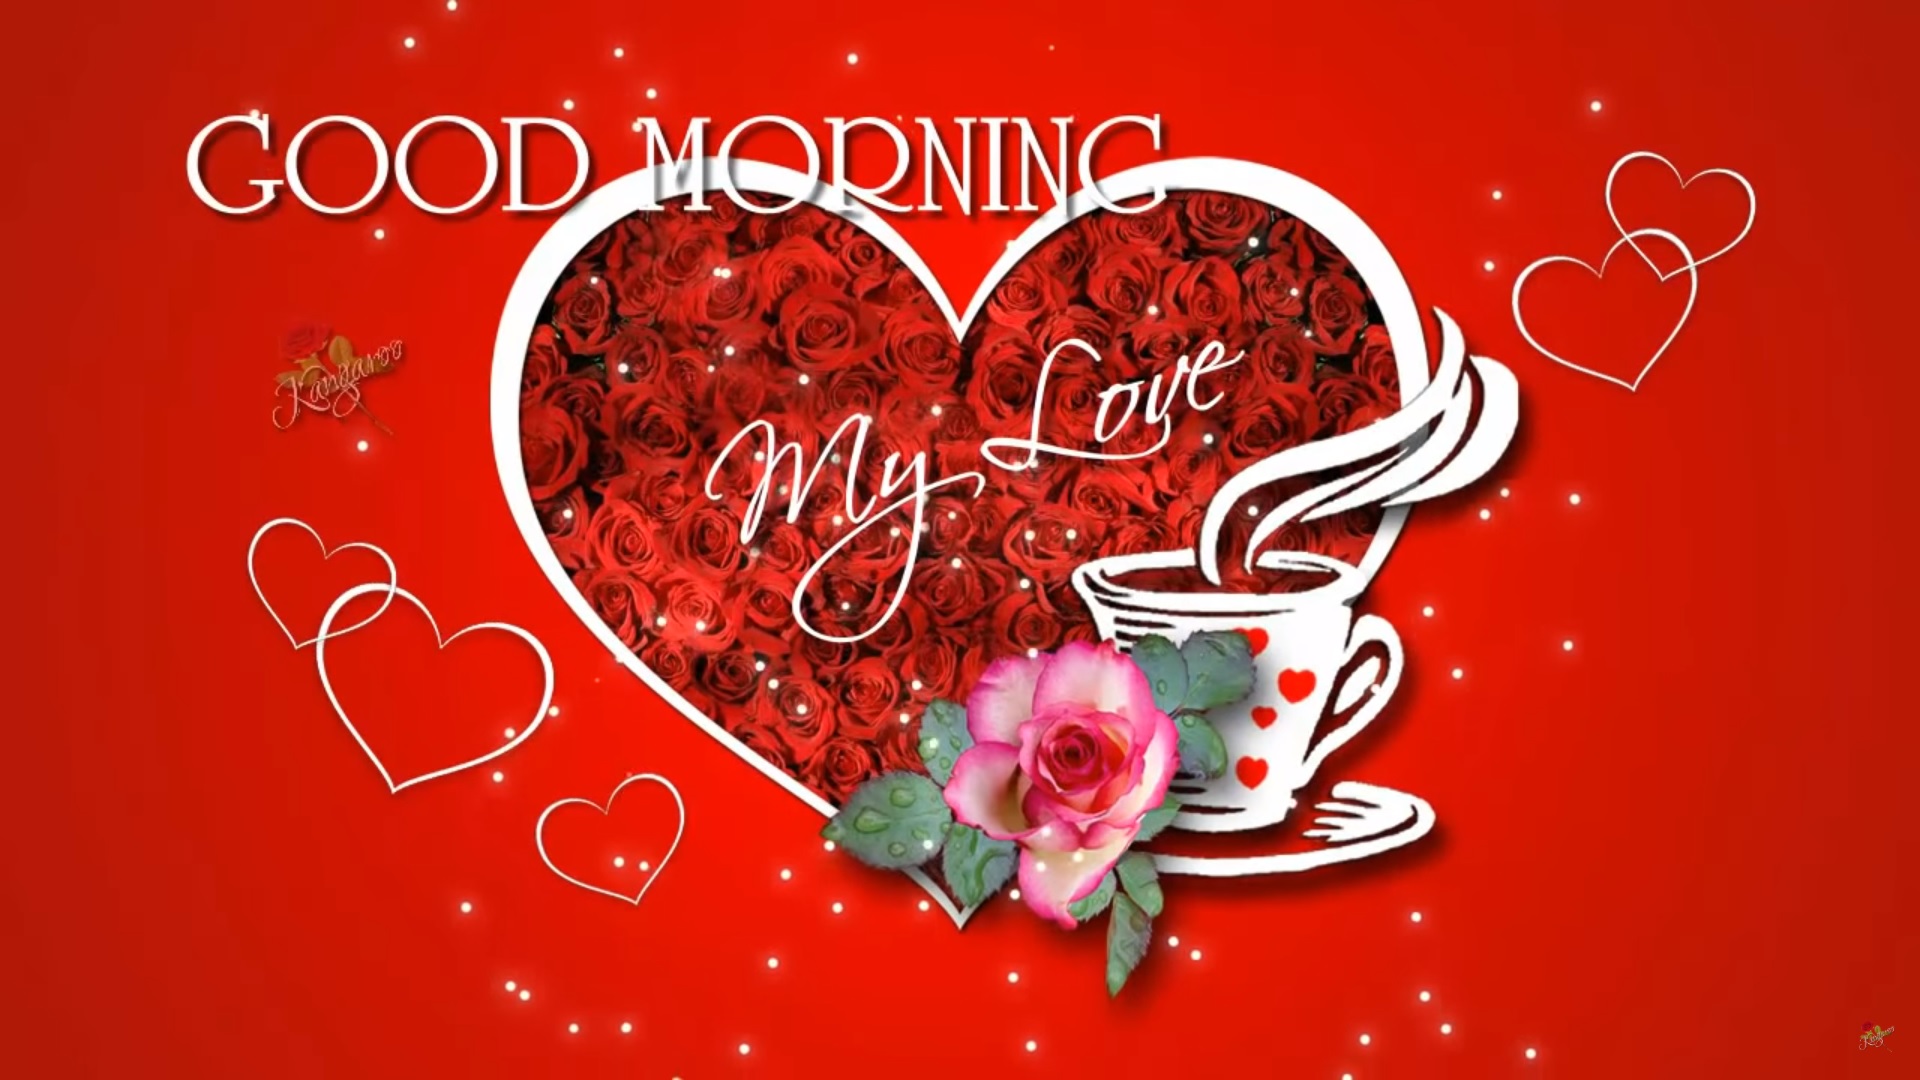 Good Morning My Love Have A Blessed Day Hd Wallpaper For Mobile Phones  Tablet And Pc : 